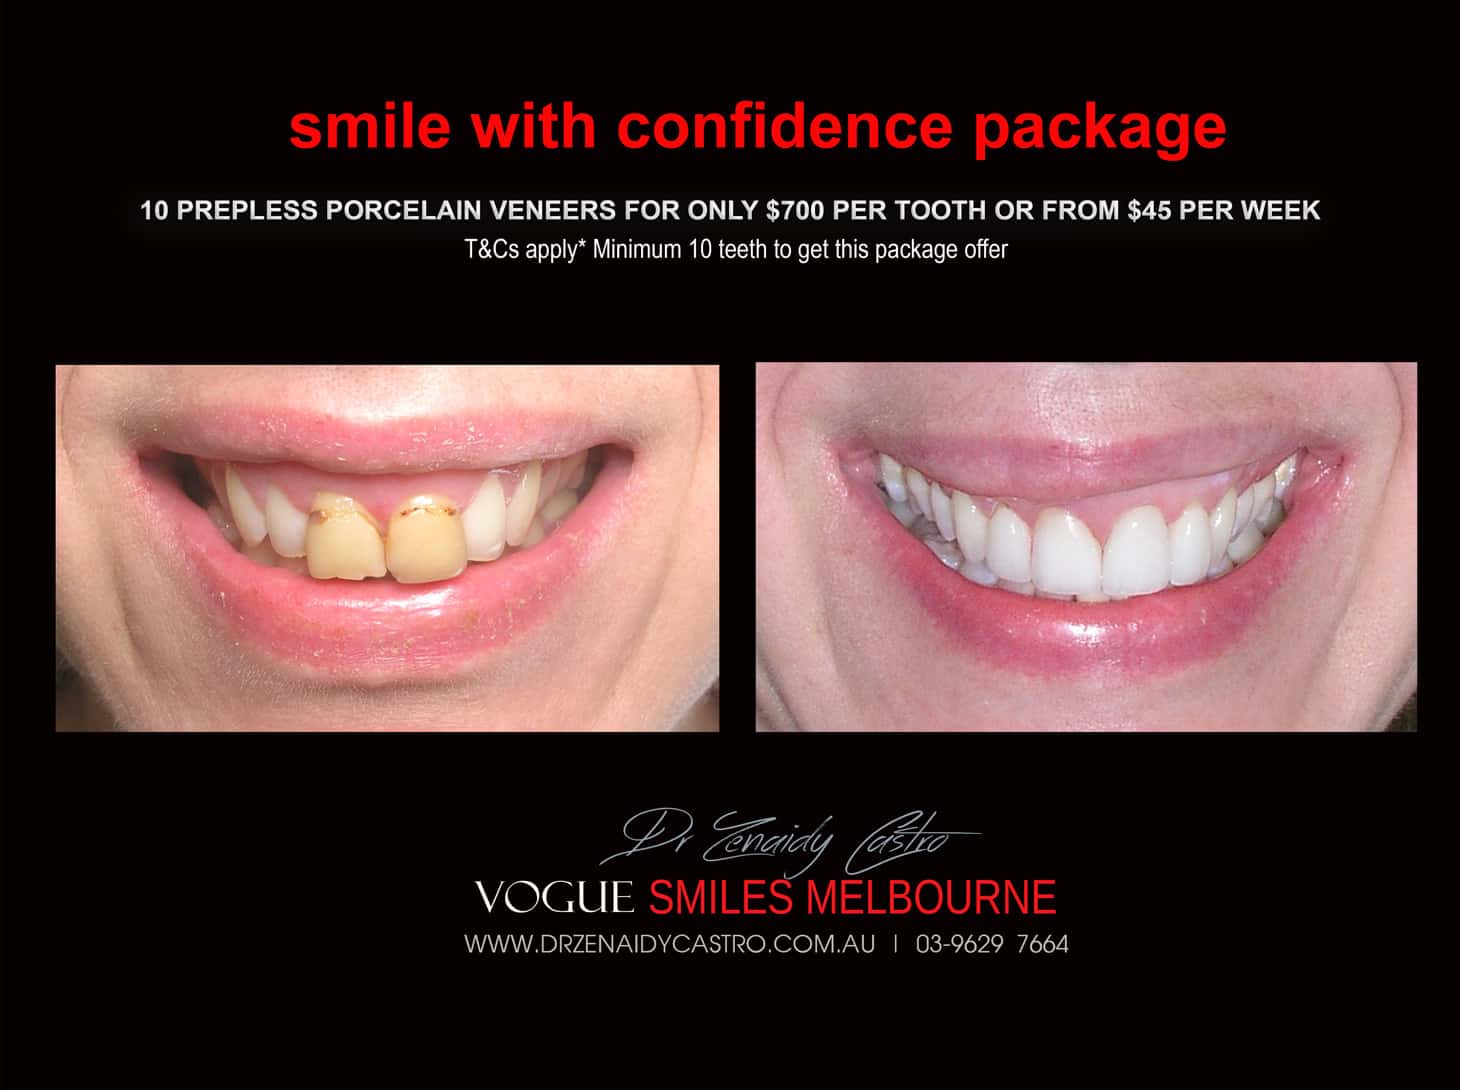 Porcelain Veneer for Discoloured Front Teeth Melbourne -Whiten Tooth Discolouration, Black Tooth, Dead Front tooth